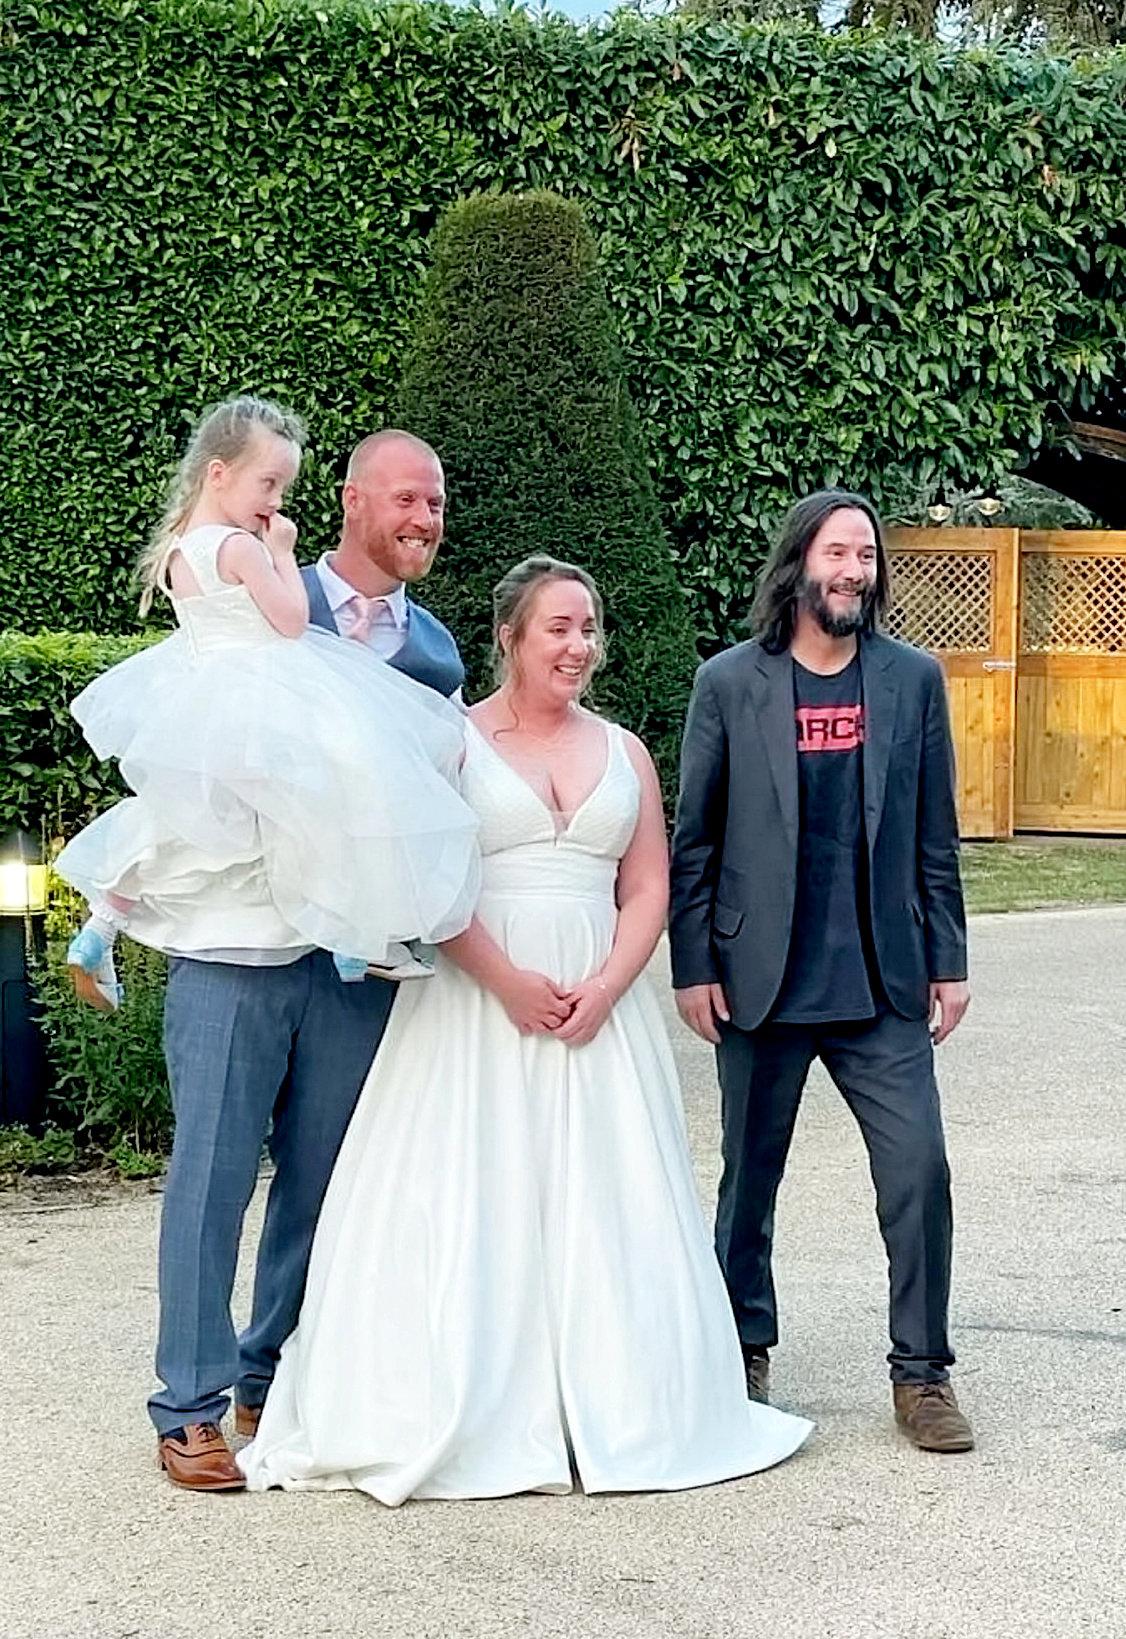 Keanu Reeves "gate-crashed" a couple's wedding in Daventry, Northamptonshire, UK. (SWNS)